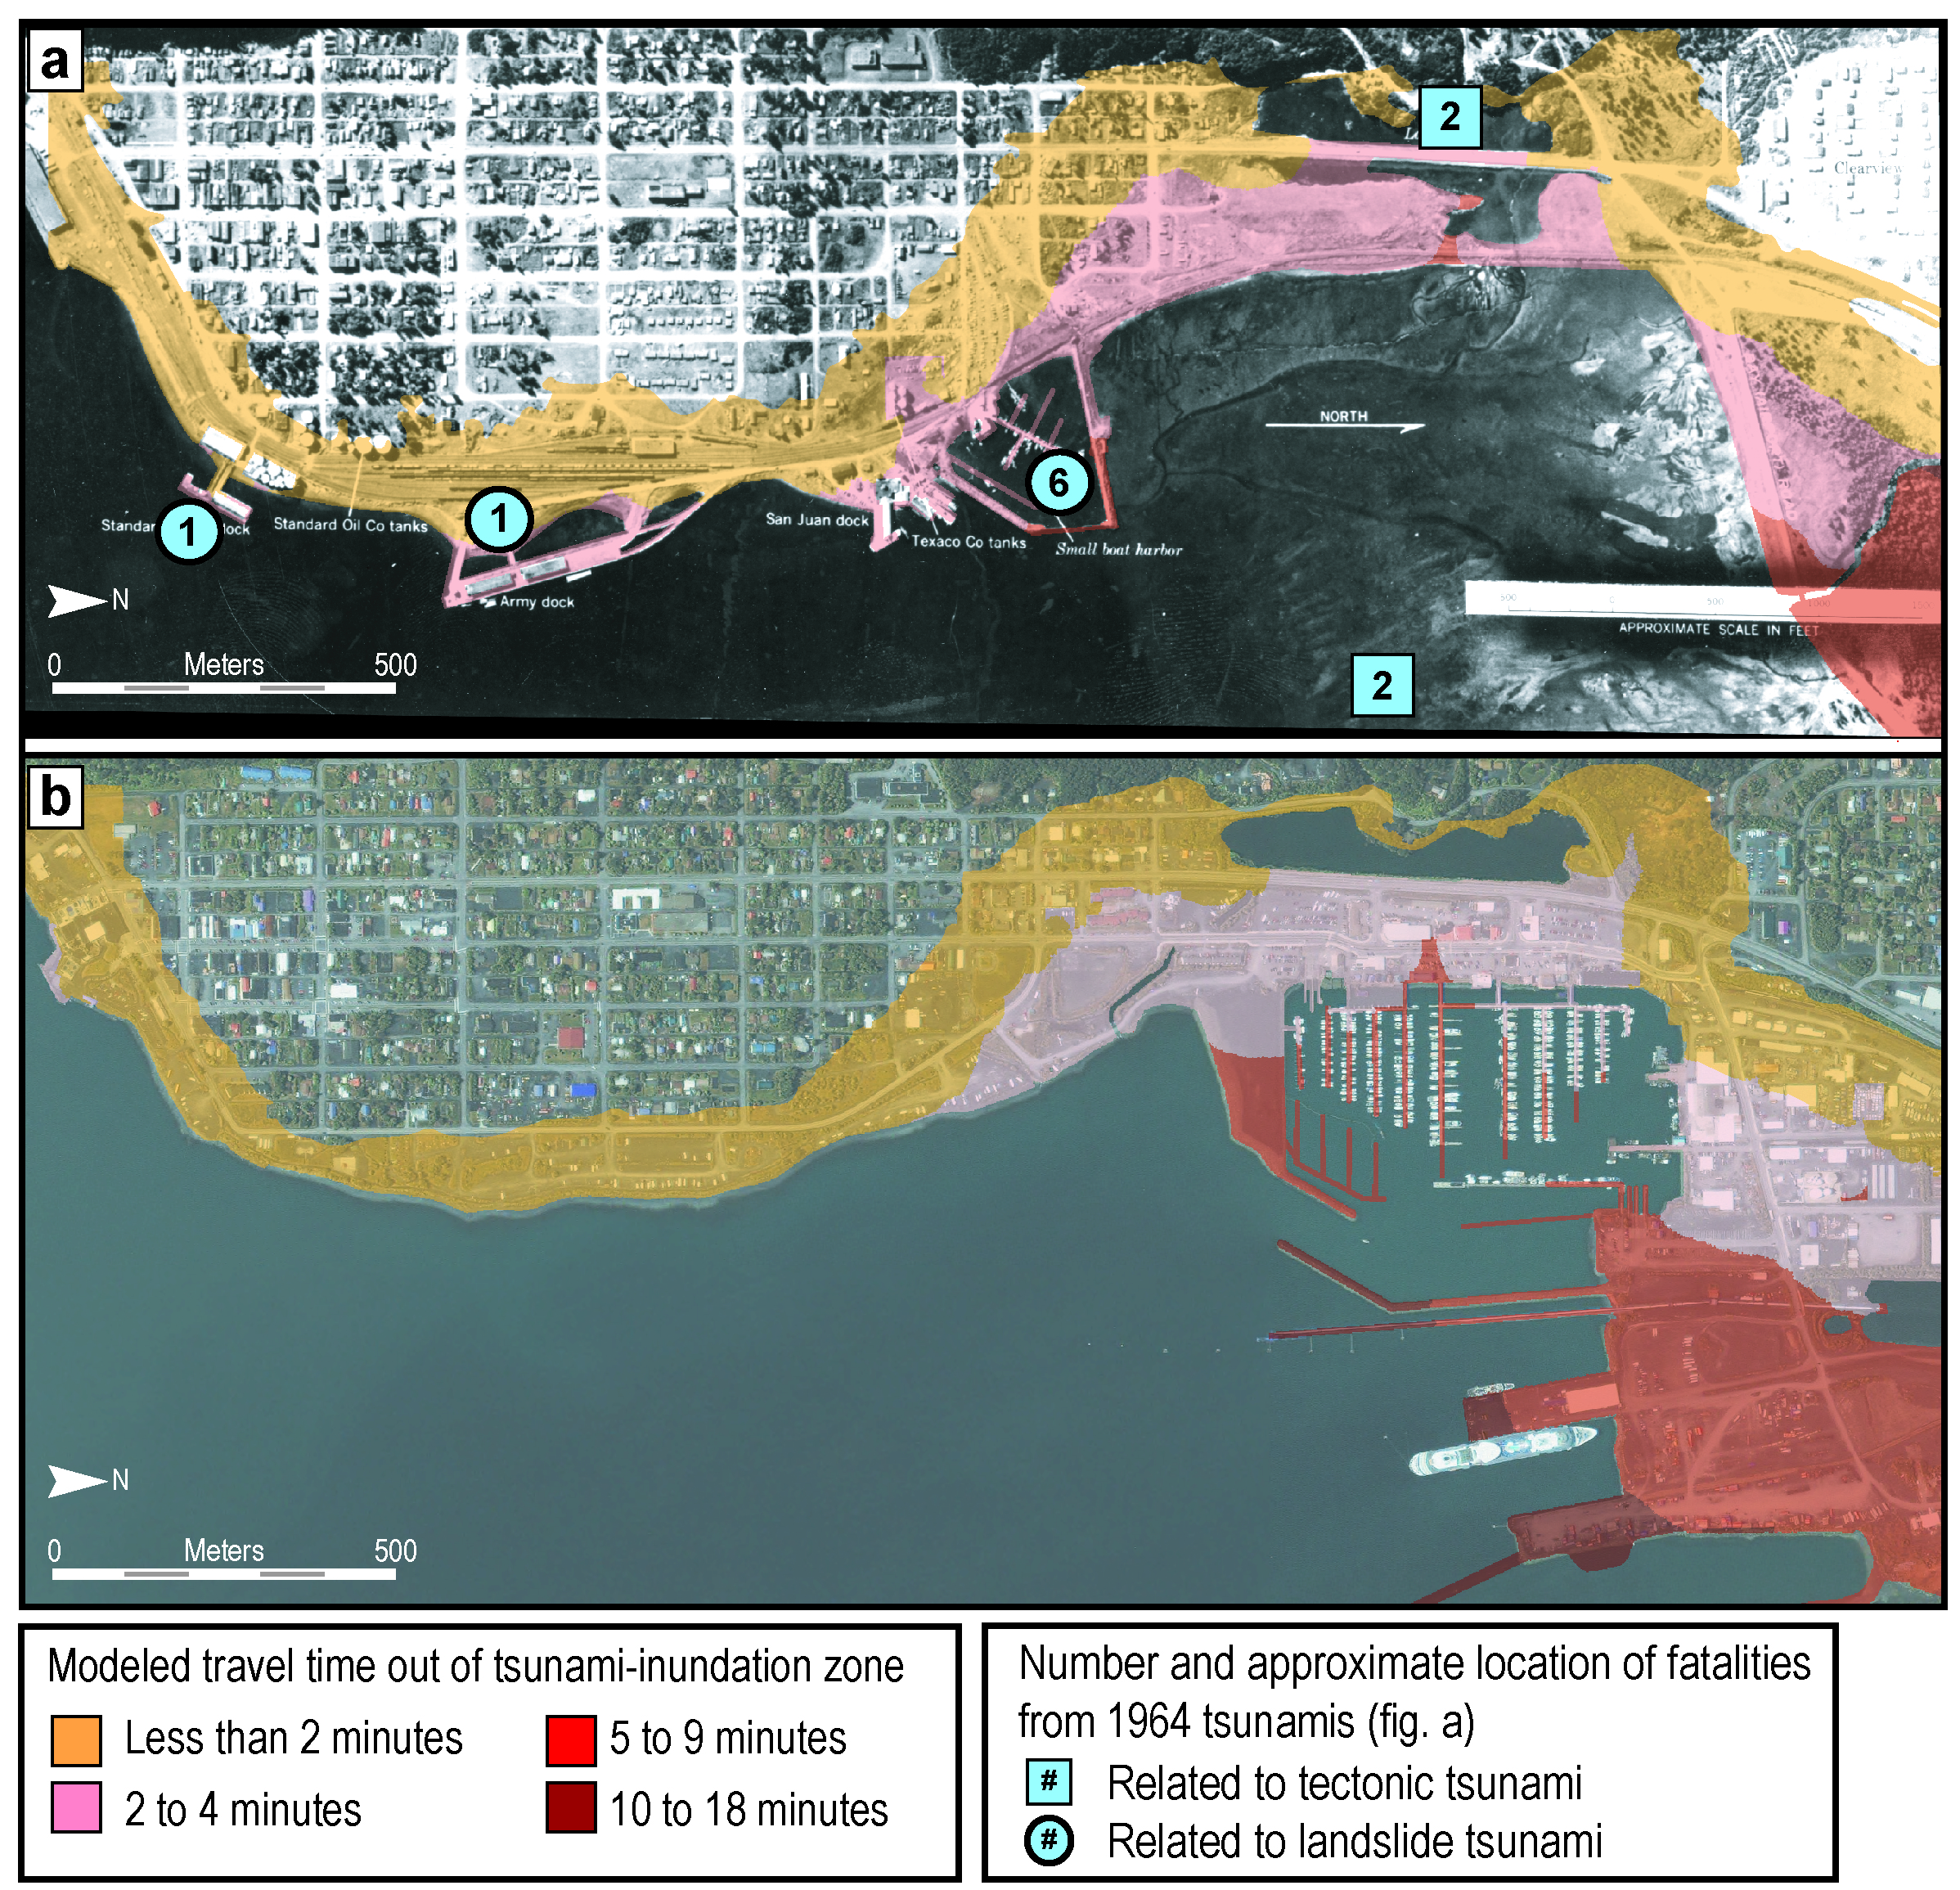 Maps of modeled evacuation travel times in downtown Seward, Alaska, assuming a slow running speed of 1.79 m/s based on (A) 1963 land cover and 1960 population distributions over a 1963 image of Seward and (B) modern day conditions over a 2005 image of Seward.